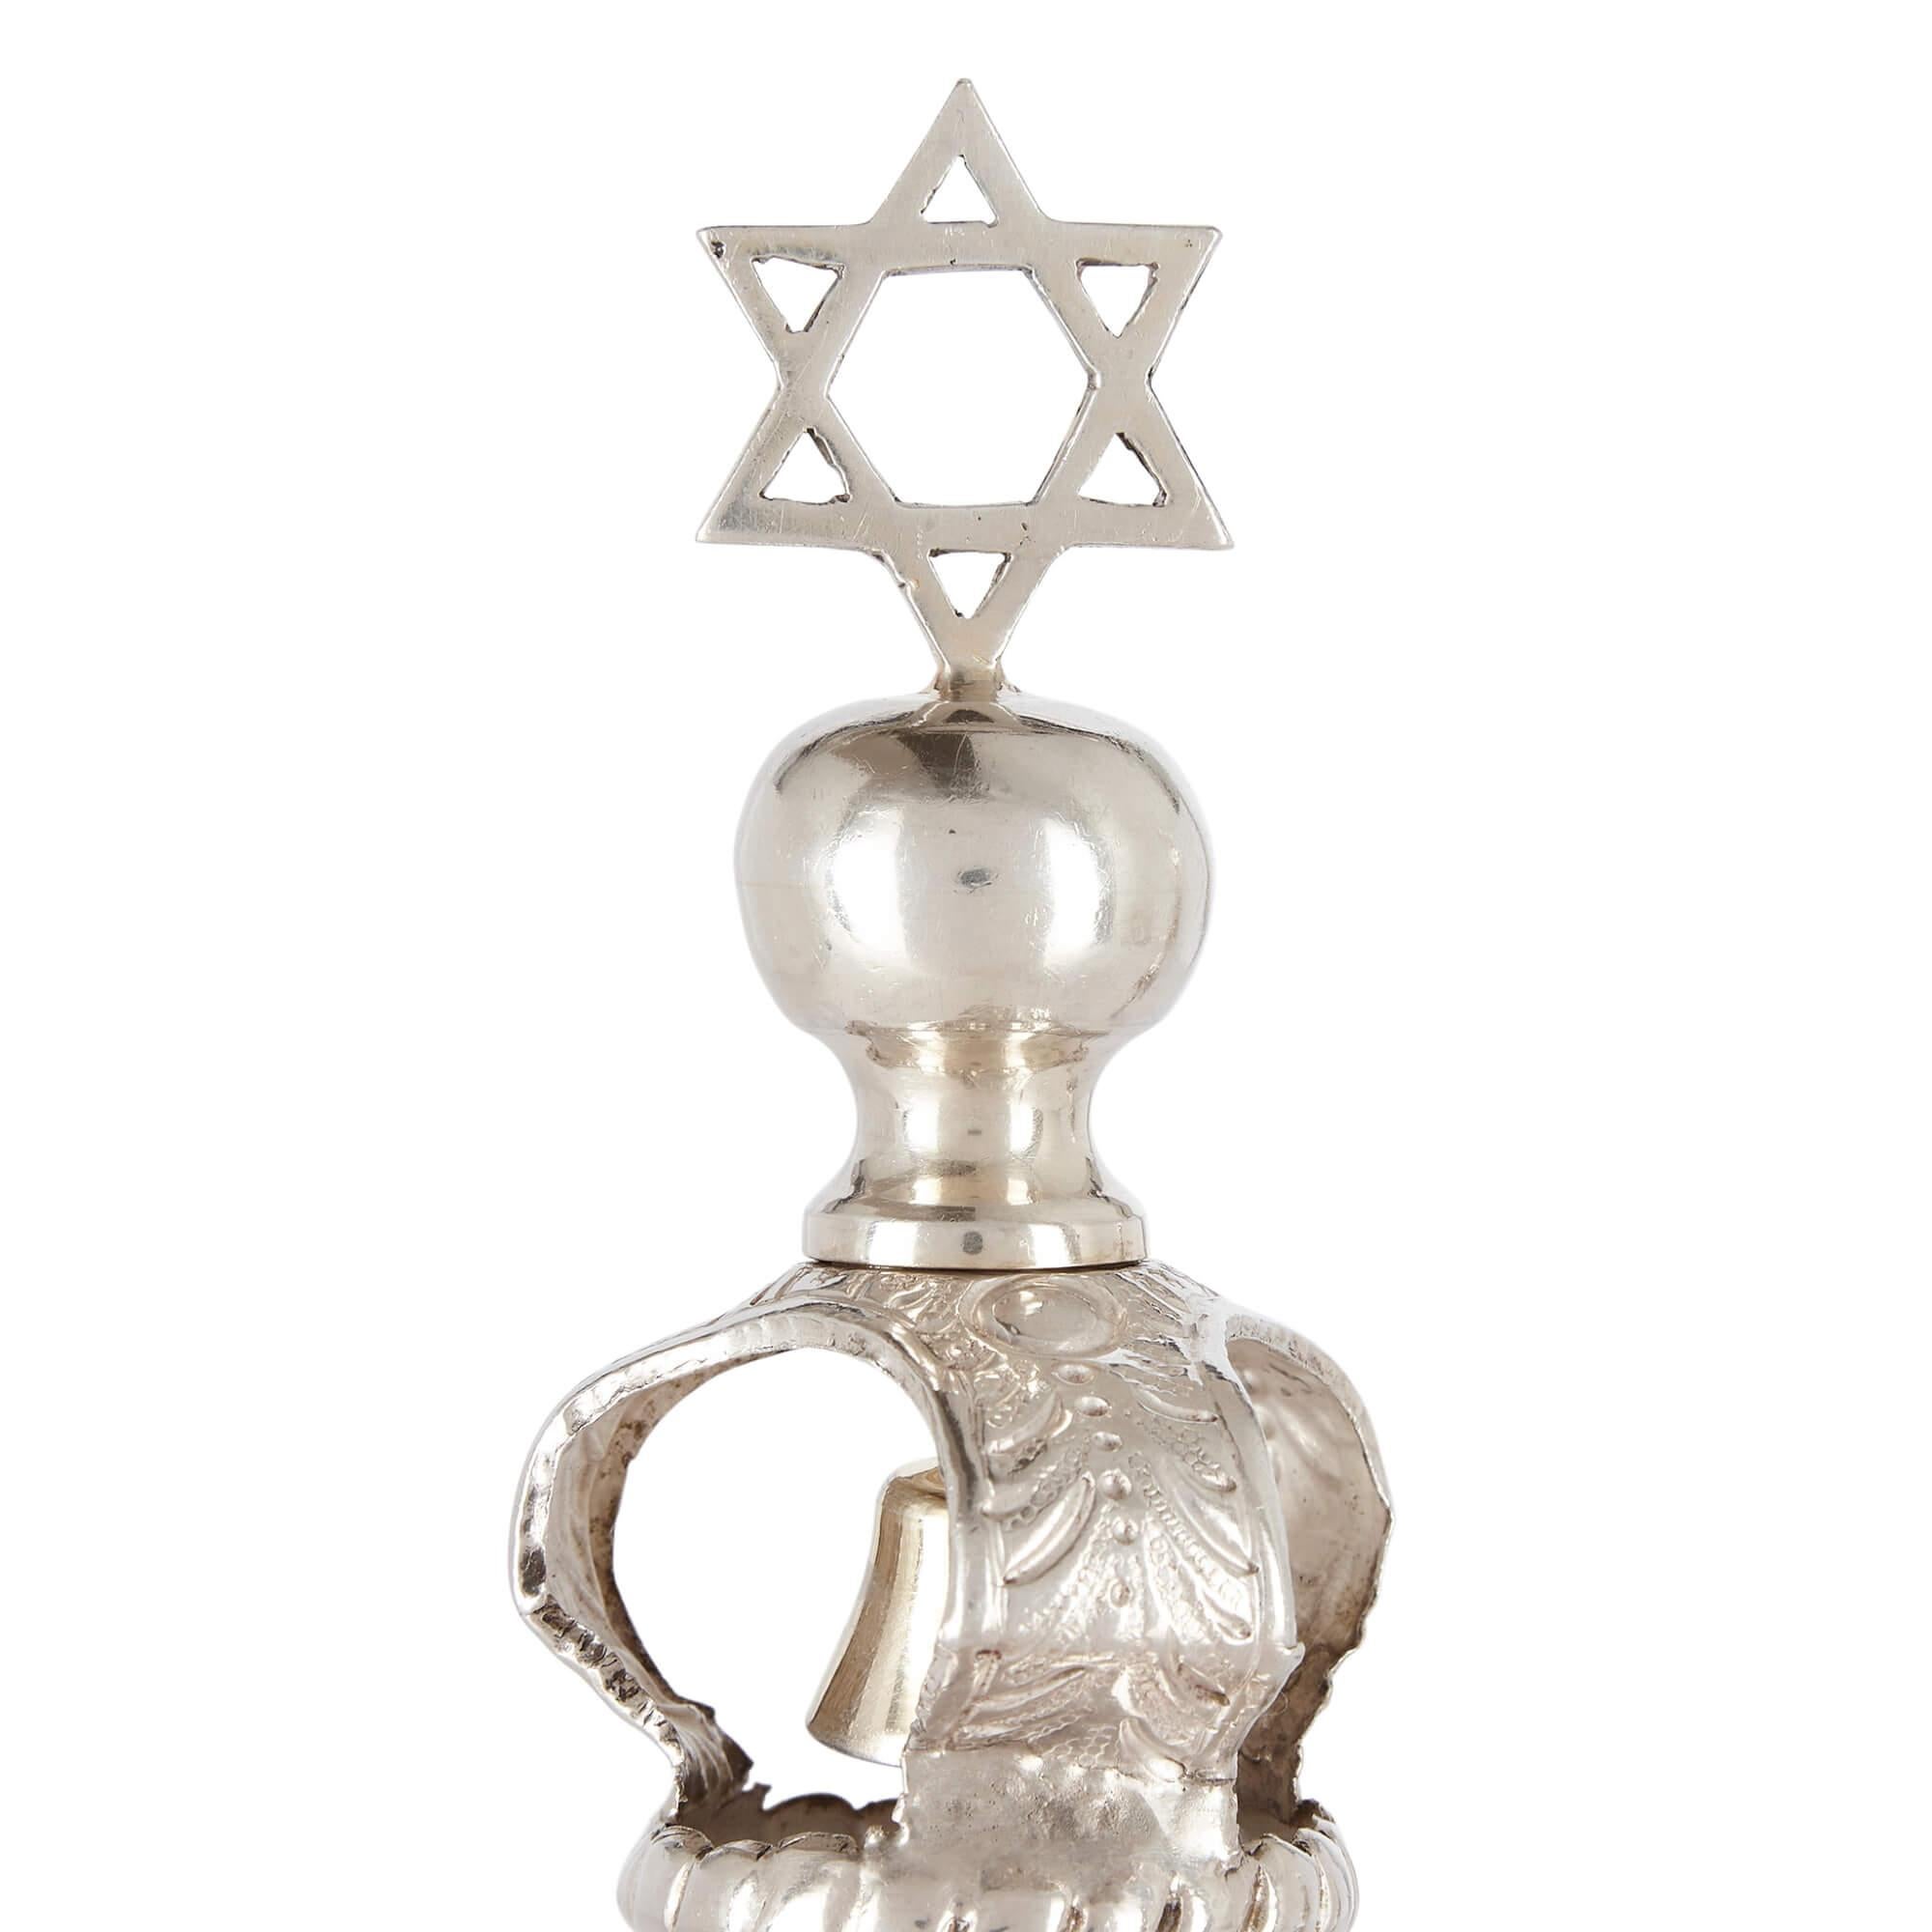 Pair of English silver and silver gilt rimonim 
English, c. 1920
Height 37cm, diameter 10cm

Forged from luminous silver and enhanced with elegant silver gilt accents, this refined pair of antique Judaica, referred to as Rimonim, function as Torah